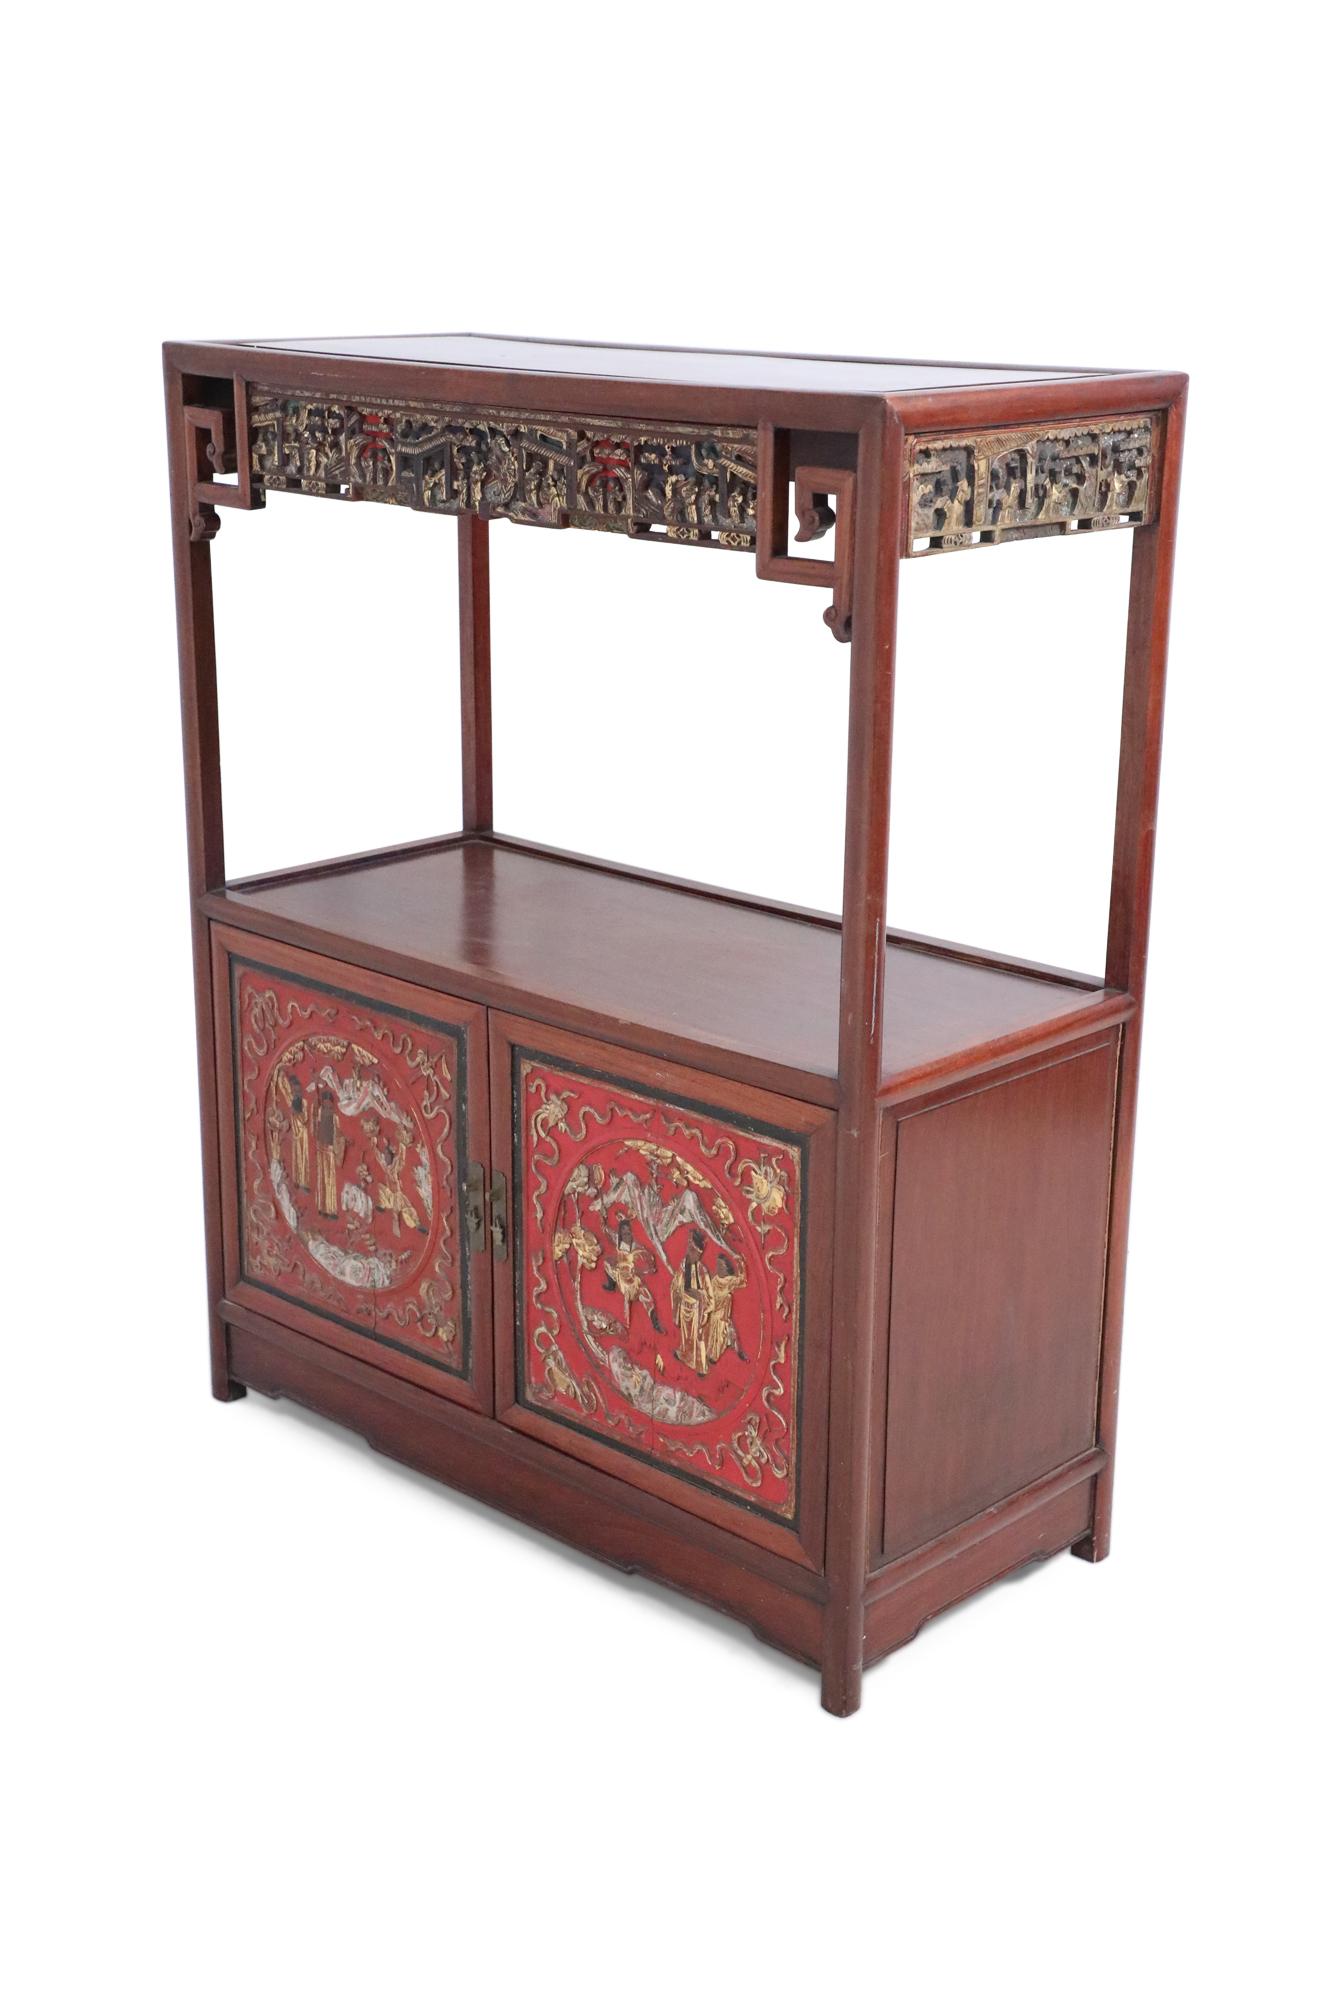 Chinese (early 20th Century) red wooden display cabinet with an open main shelf framed above a cabinet, and intricate gold figurative scenes carved into both the doors, and a top border.